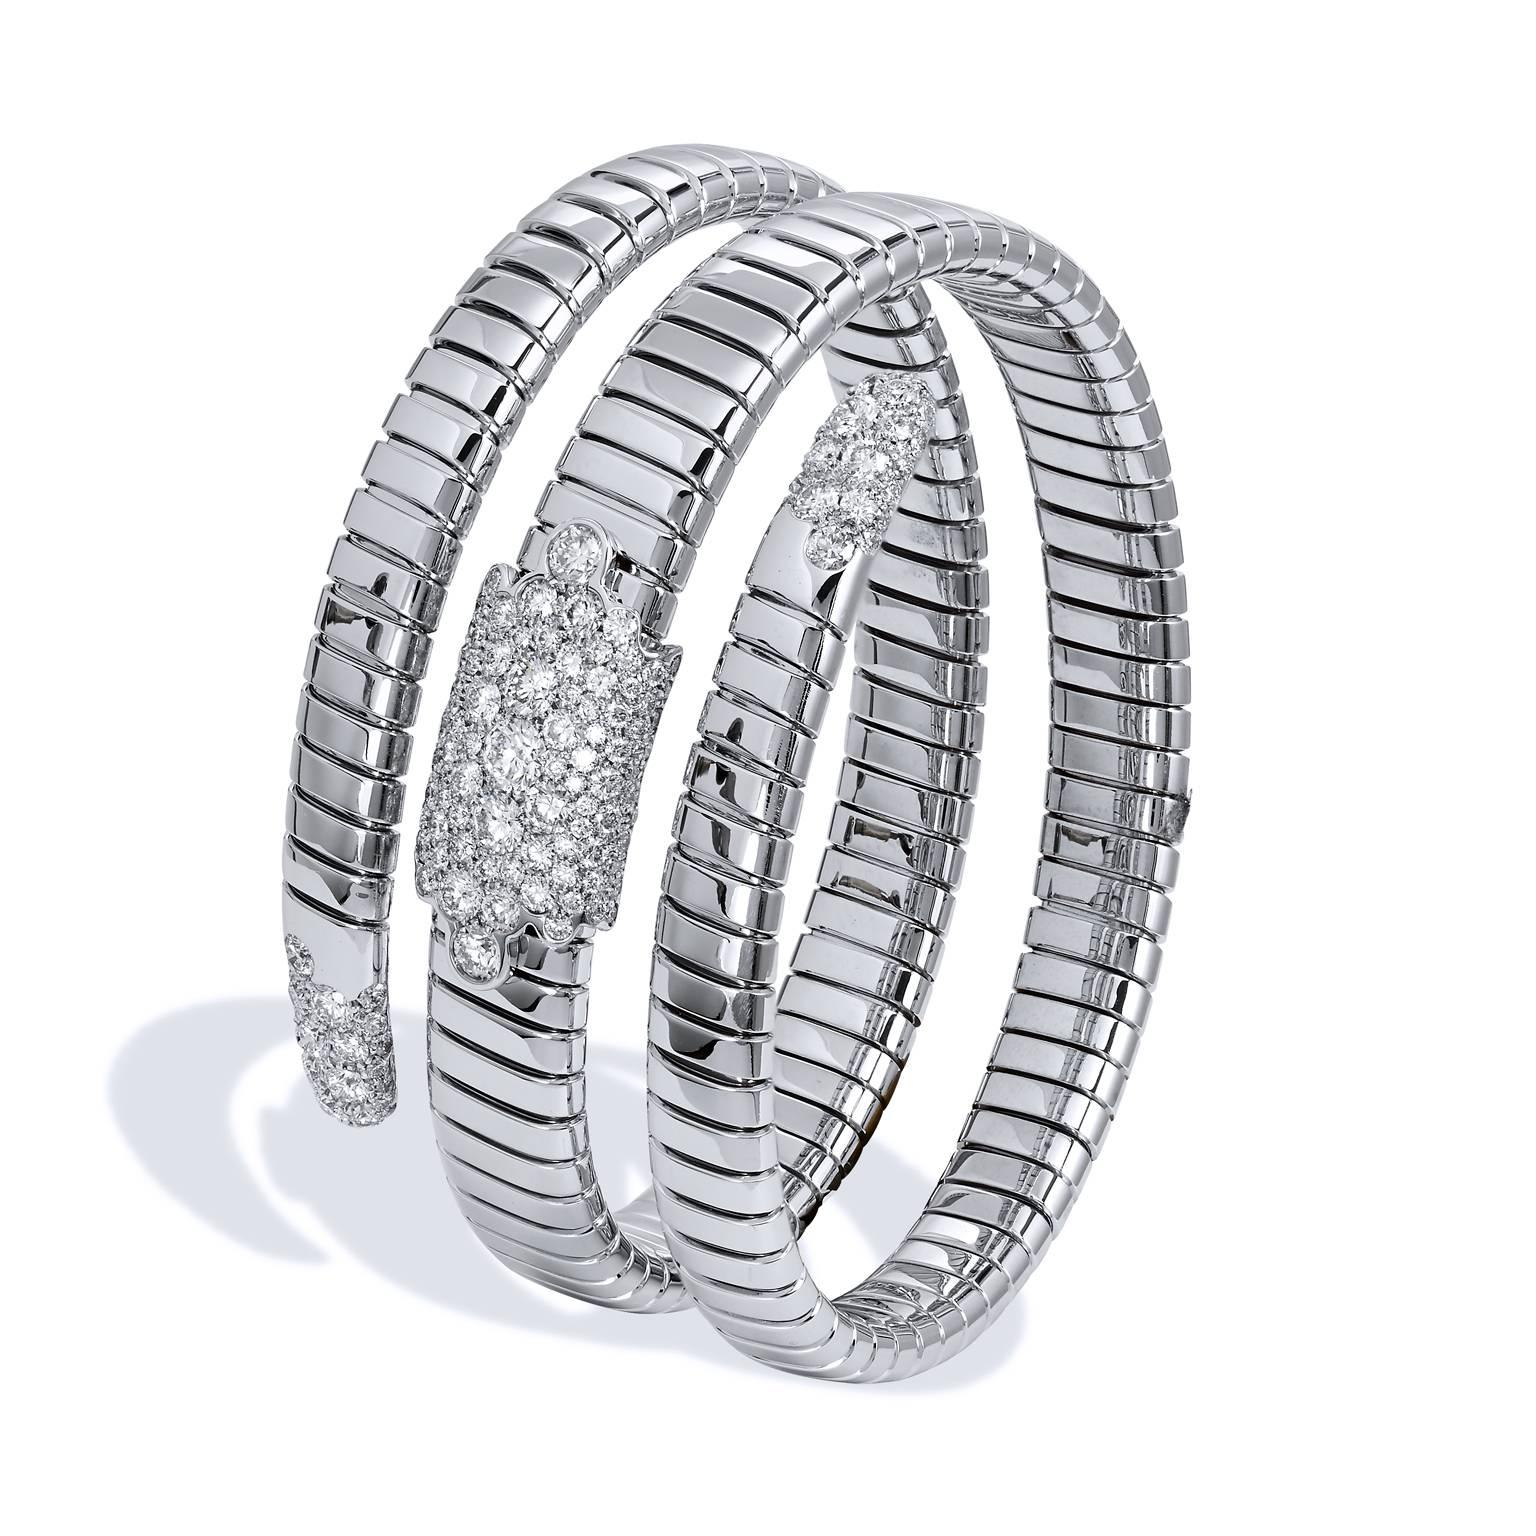 18 karat white gold stretchy coil bracelet featuring a total weight of 3.55 carat of diamond pave set (G/SI1).